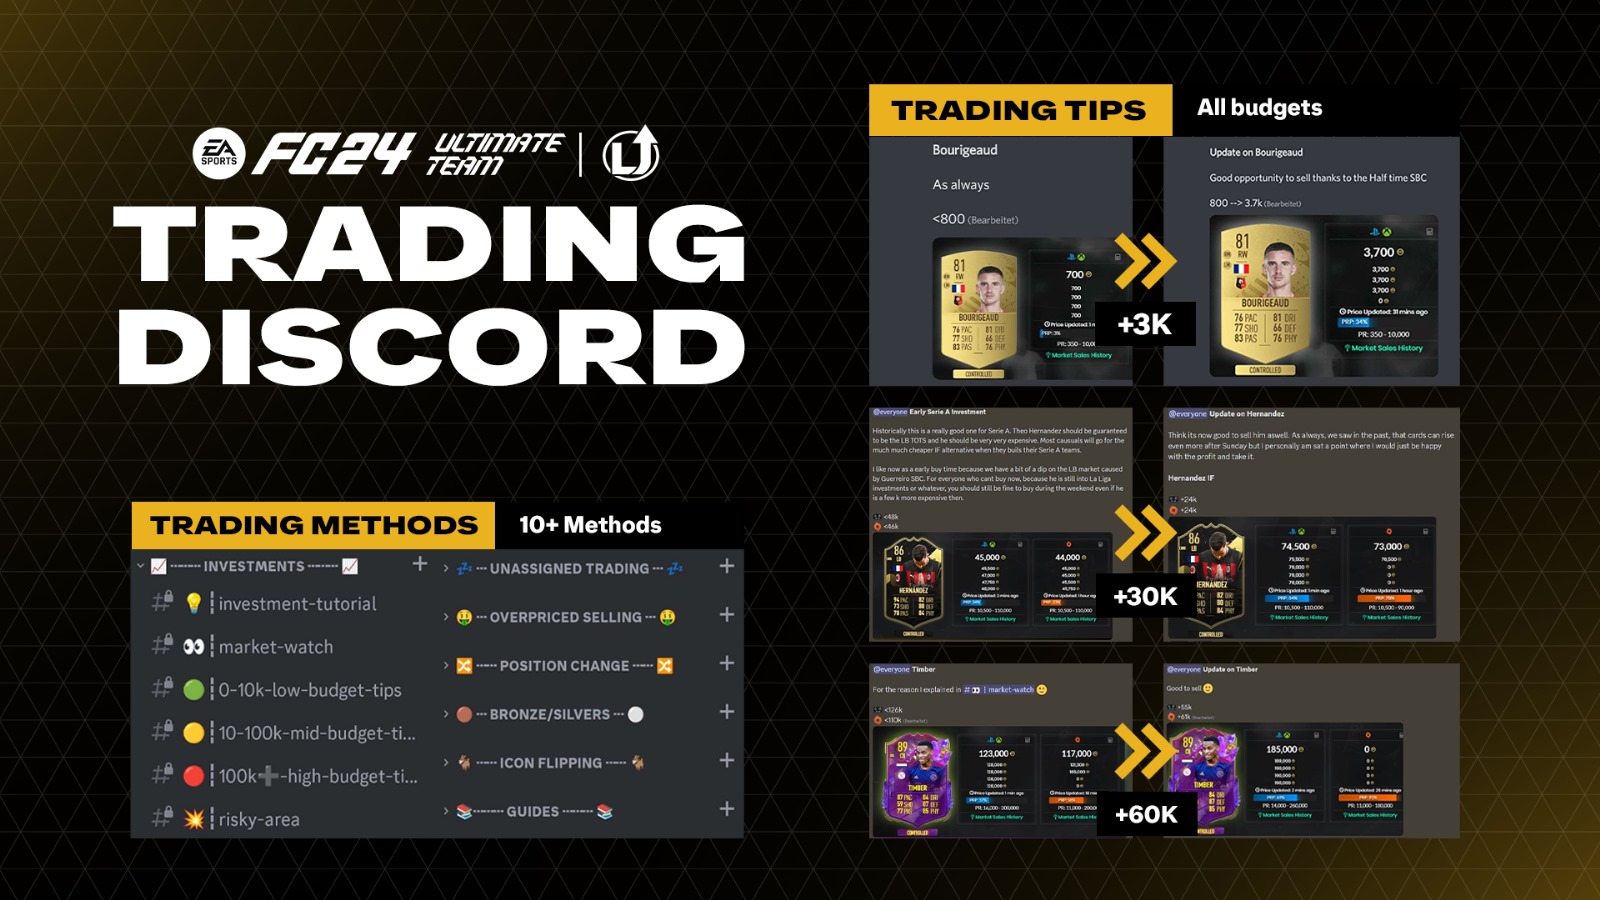 EA FC 24 - Trading Discord - 1 Month Subscription PlayStation 5 Key